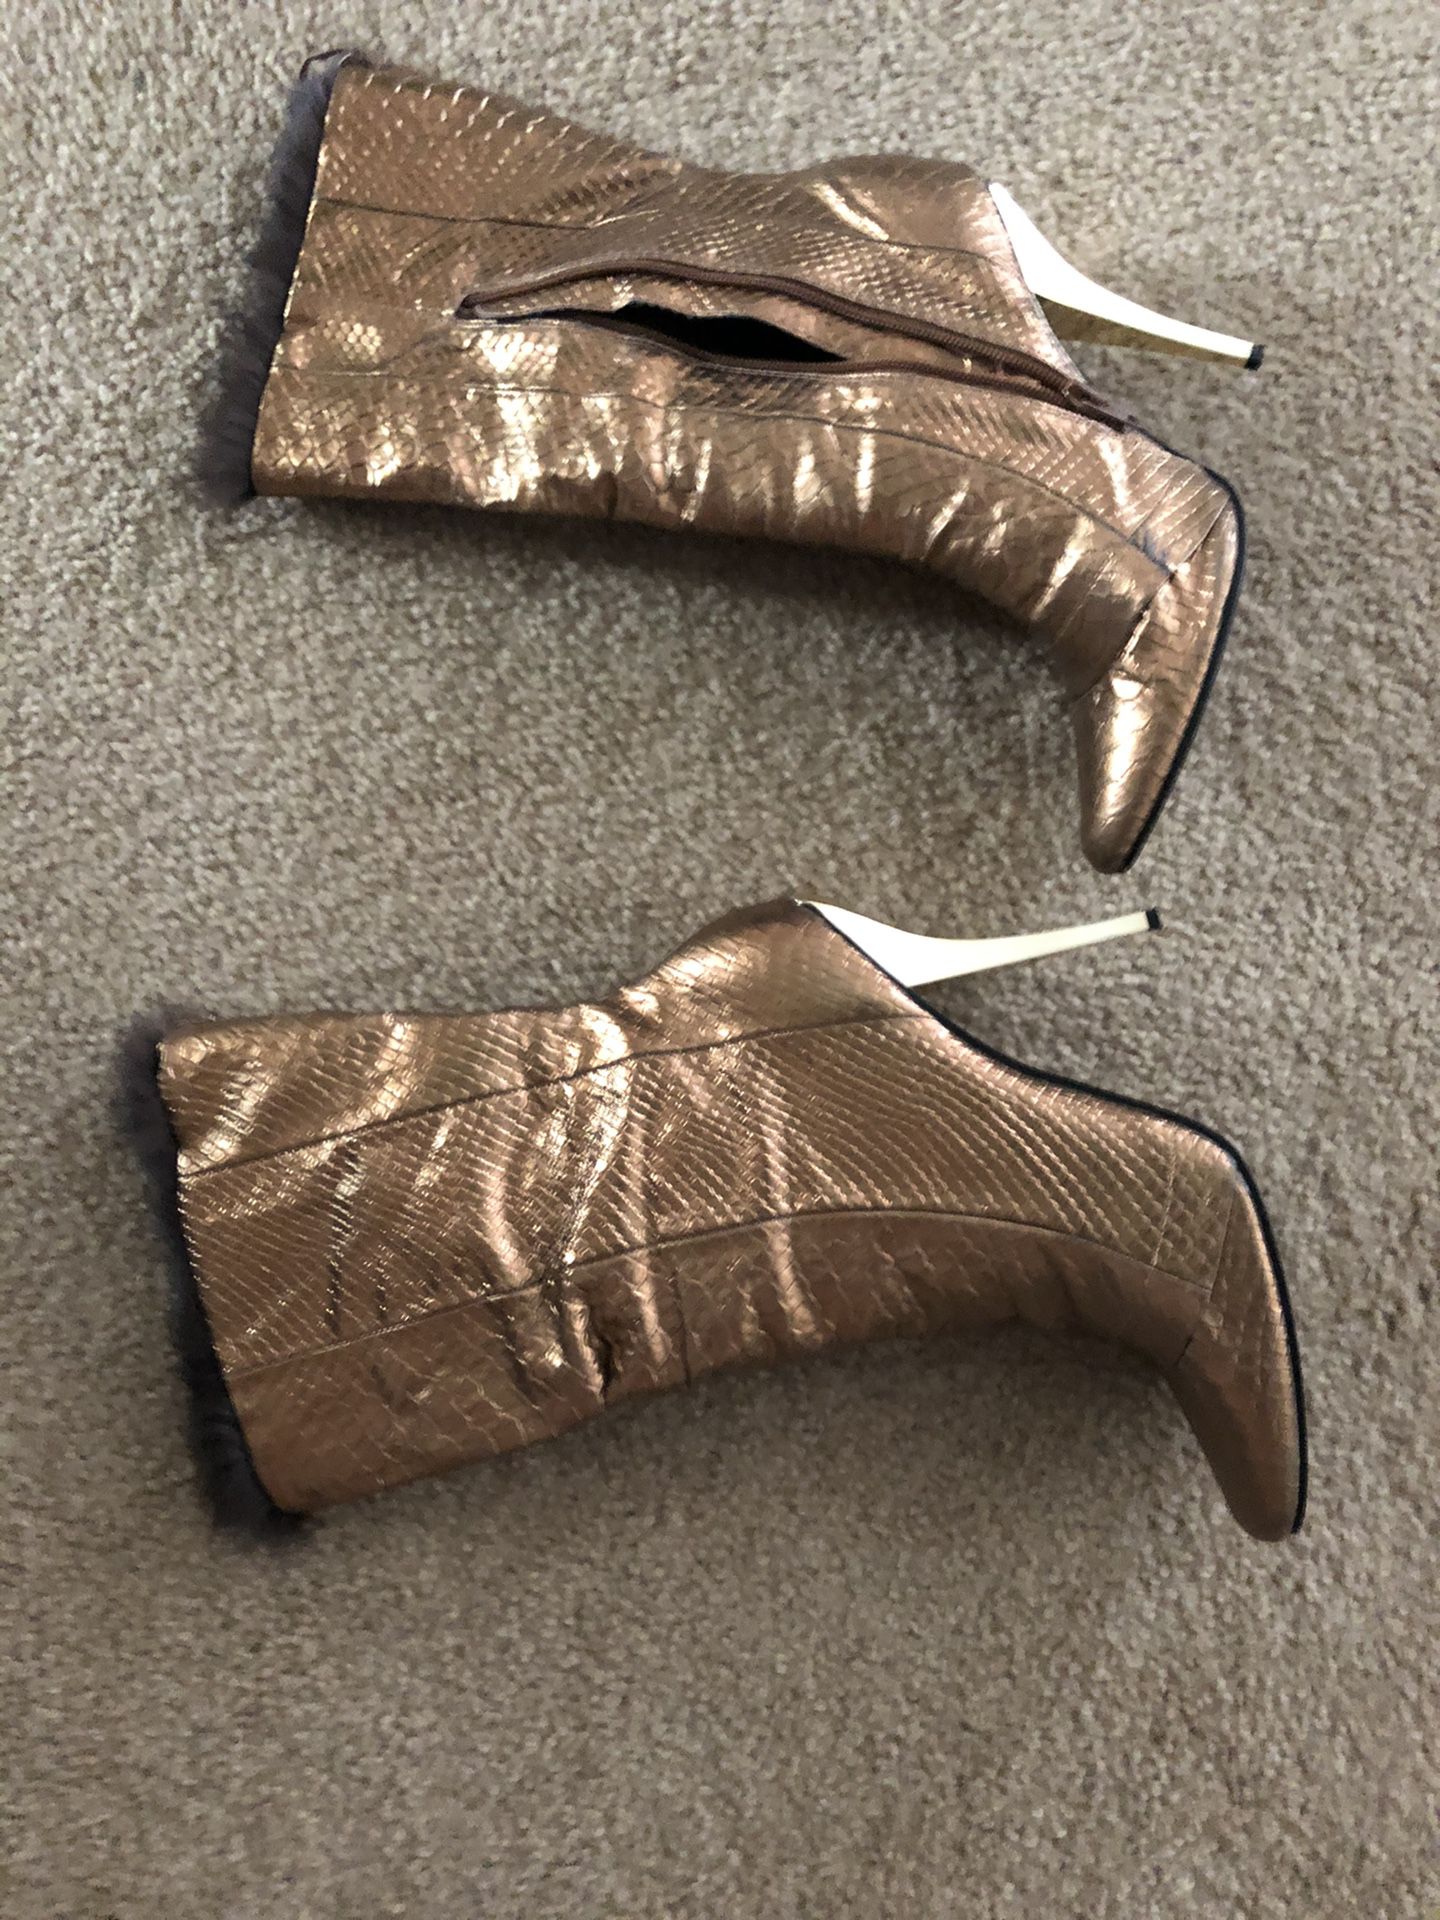 Women’s Gold Boot Size 10 With Fur Inside And Gold Heel